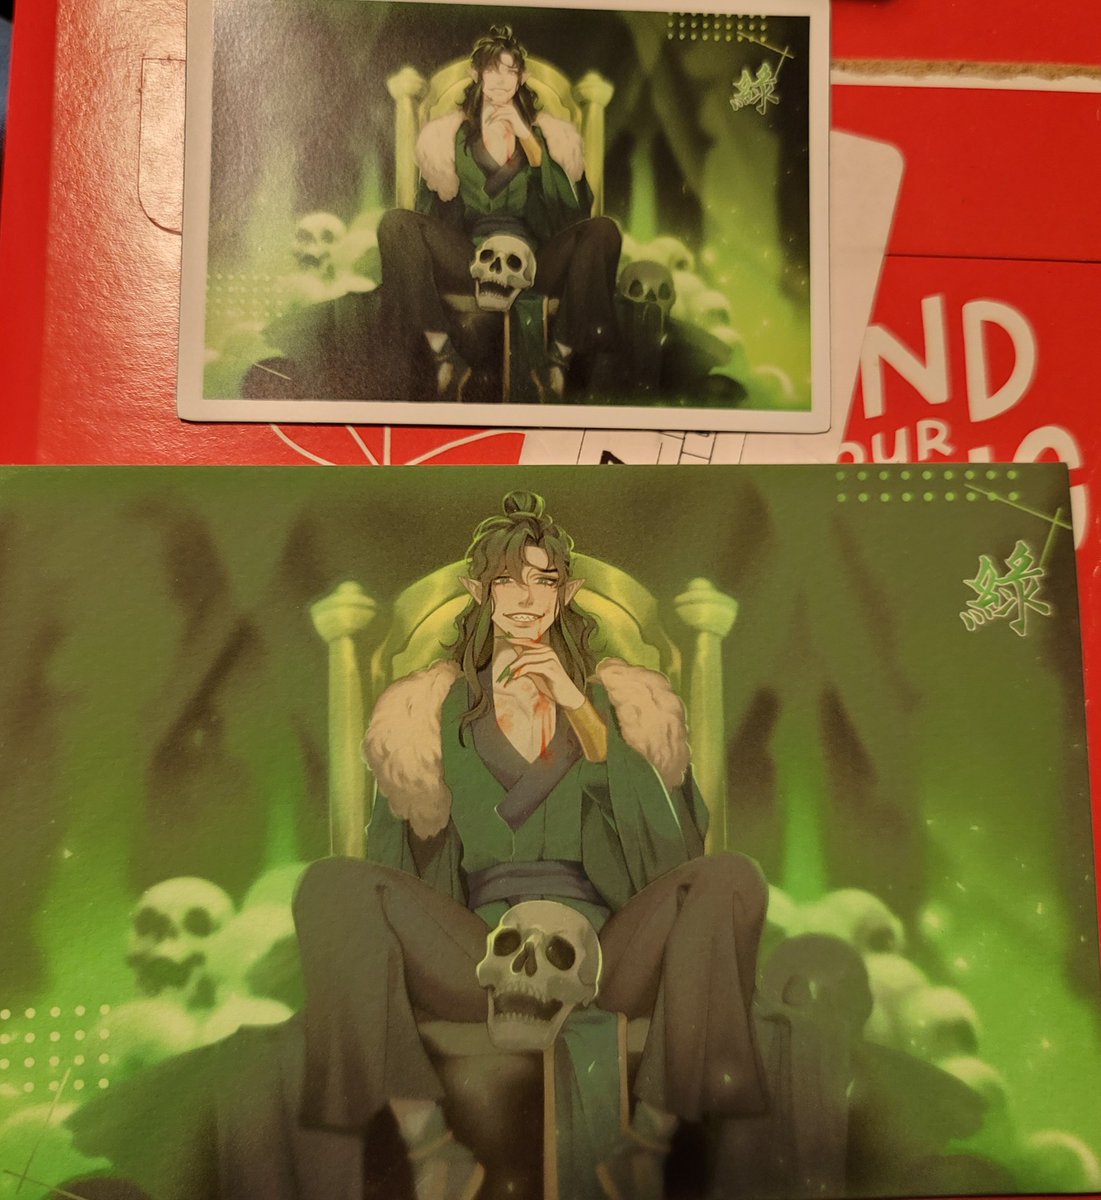 There was actually MOAR lol 😆

I'm a totally normal #TGCF fan just buying art & being normal about #QiRong over here 😏 💚💚💚